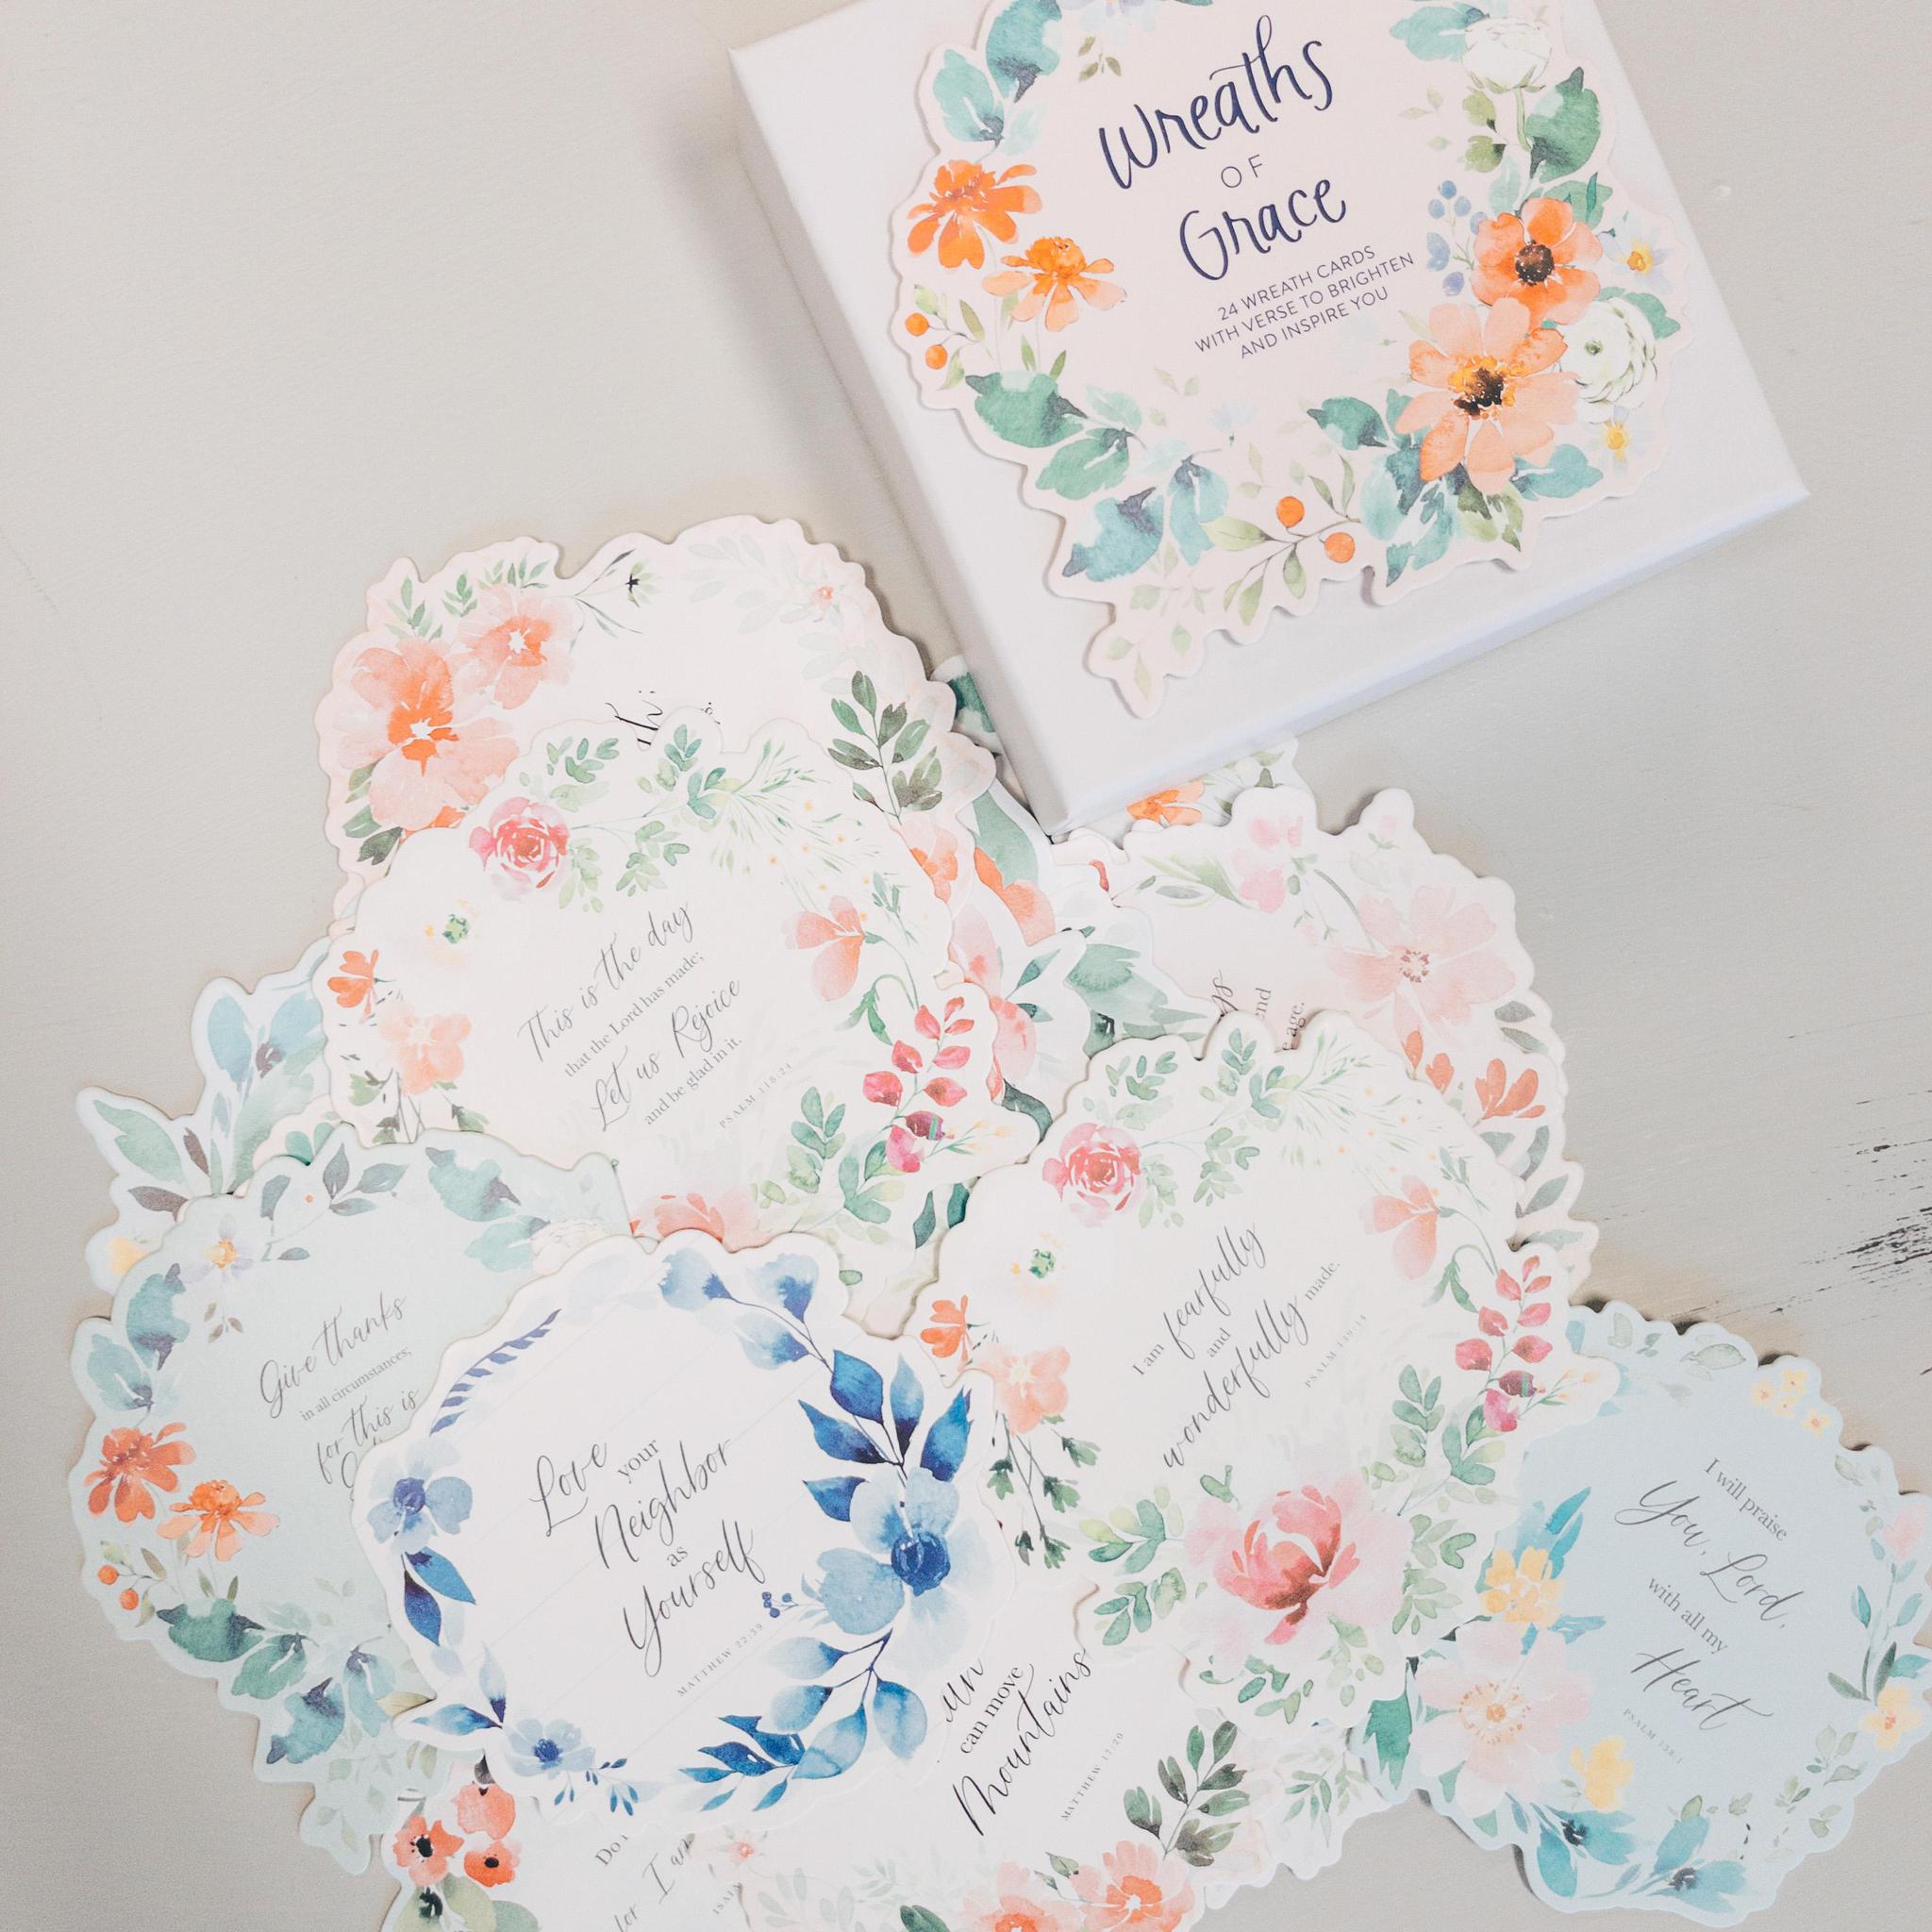 Wreaths of Grace Boxed Cards